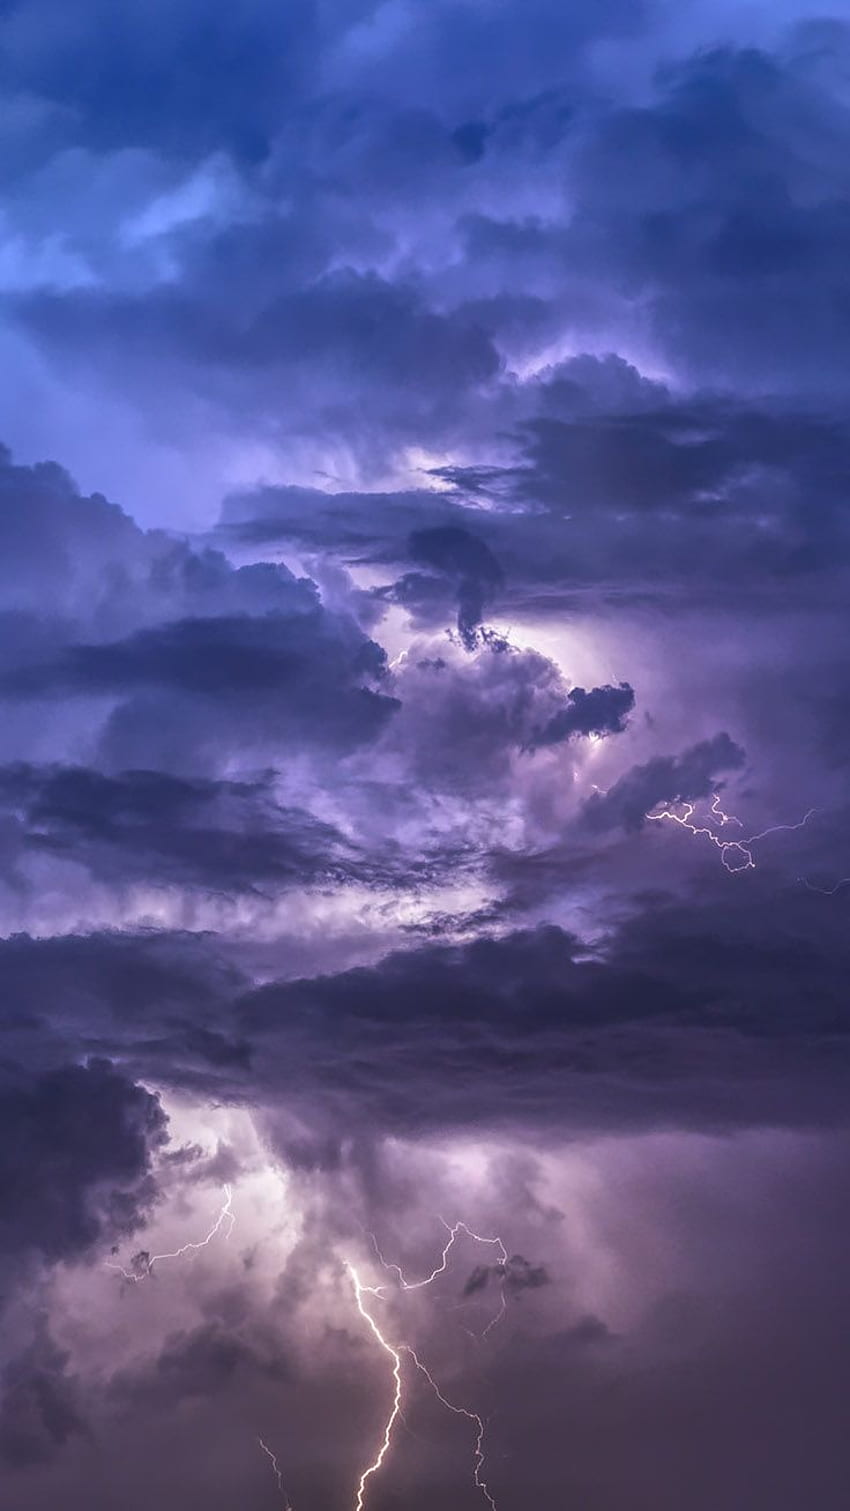 Storm iPhone -, Storm iPhone Background on Bat, Rain Clouds iPhone wallpaper ponsel HD